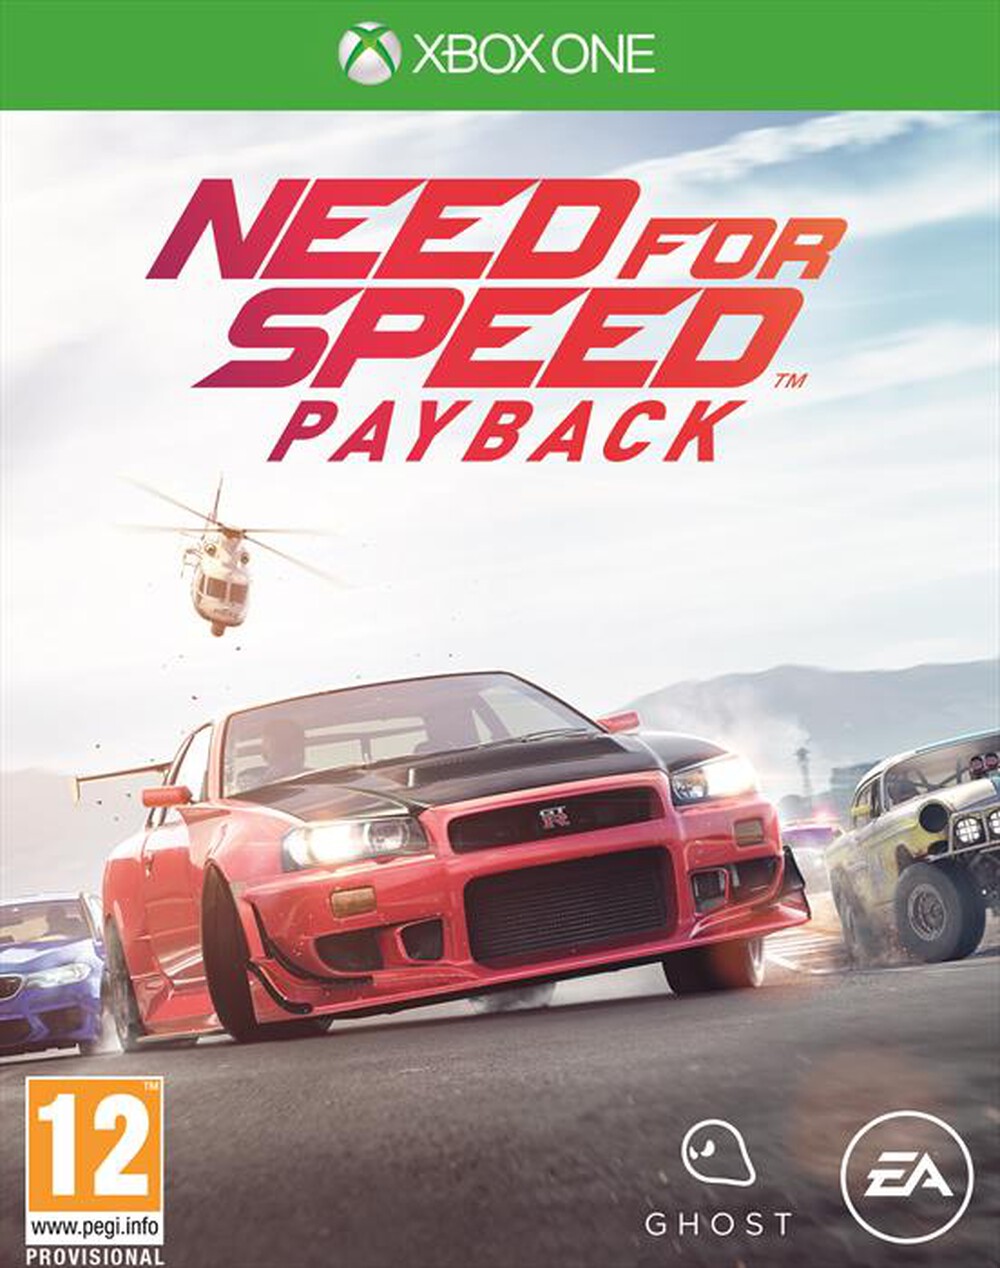 "ELECTRONIC ARTS - Need for Speed PayBack XBox One"